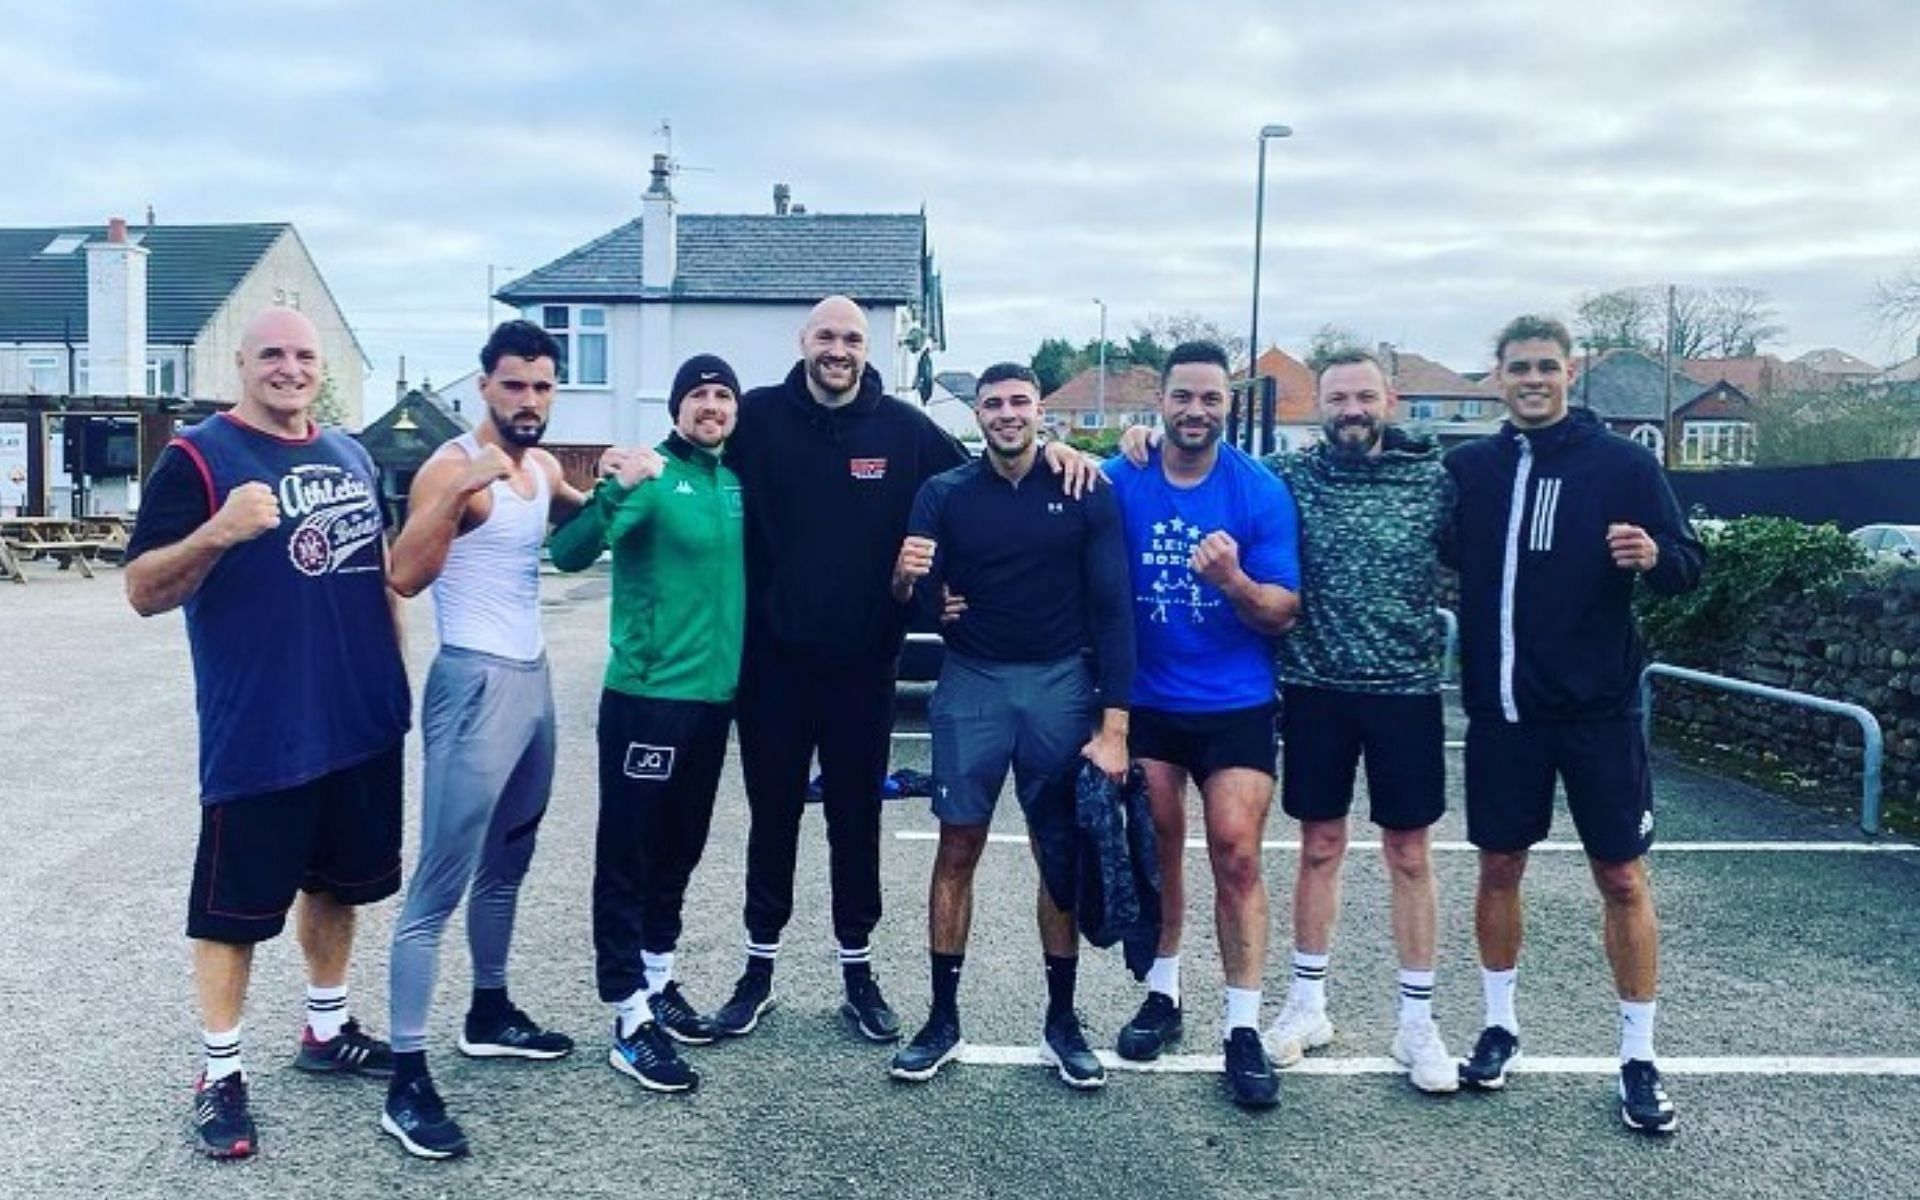 Tommy Fury fight camp for Jake Paul [Image courtesy: @gypsyking101 on Instagram]